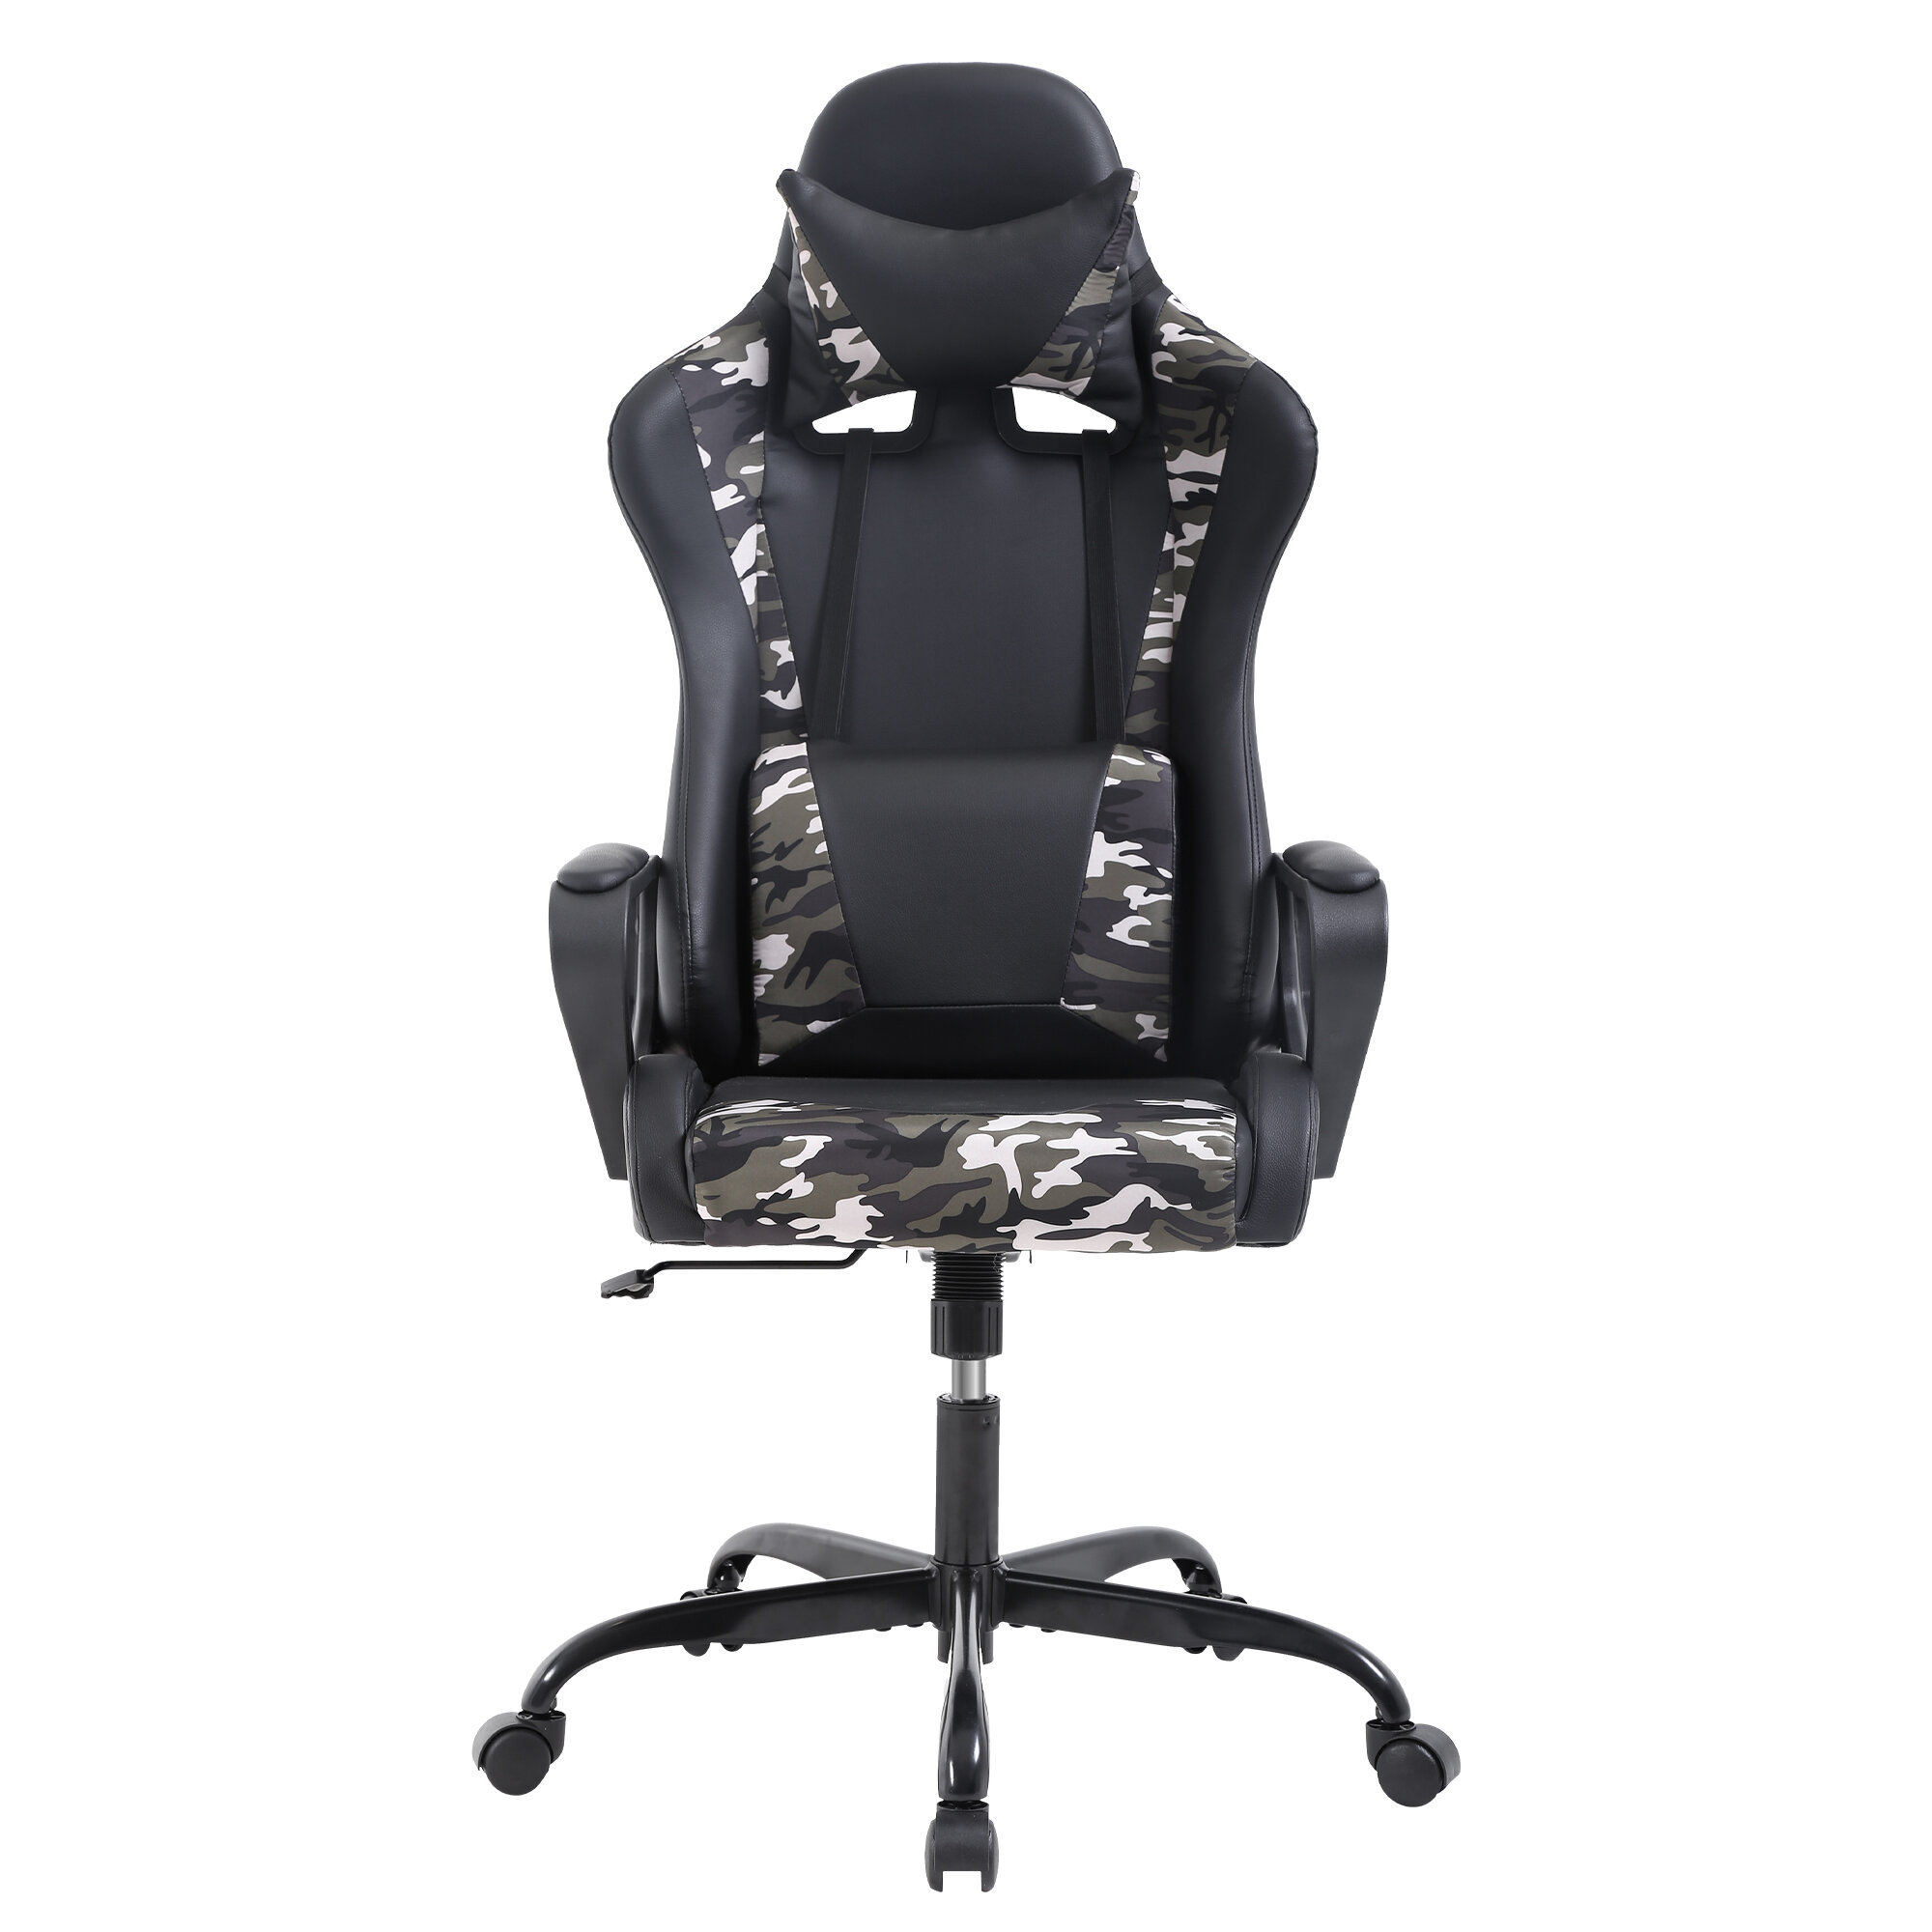 Camo PC Gaming Chair Ergonomic Office Chair Massage Desk Chair with Lumbar Support Arms Headrest High Back PU Leather Racing Chair Rolling Swivel Executive Adjustable Computer Chair for Women Adults 